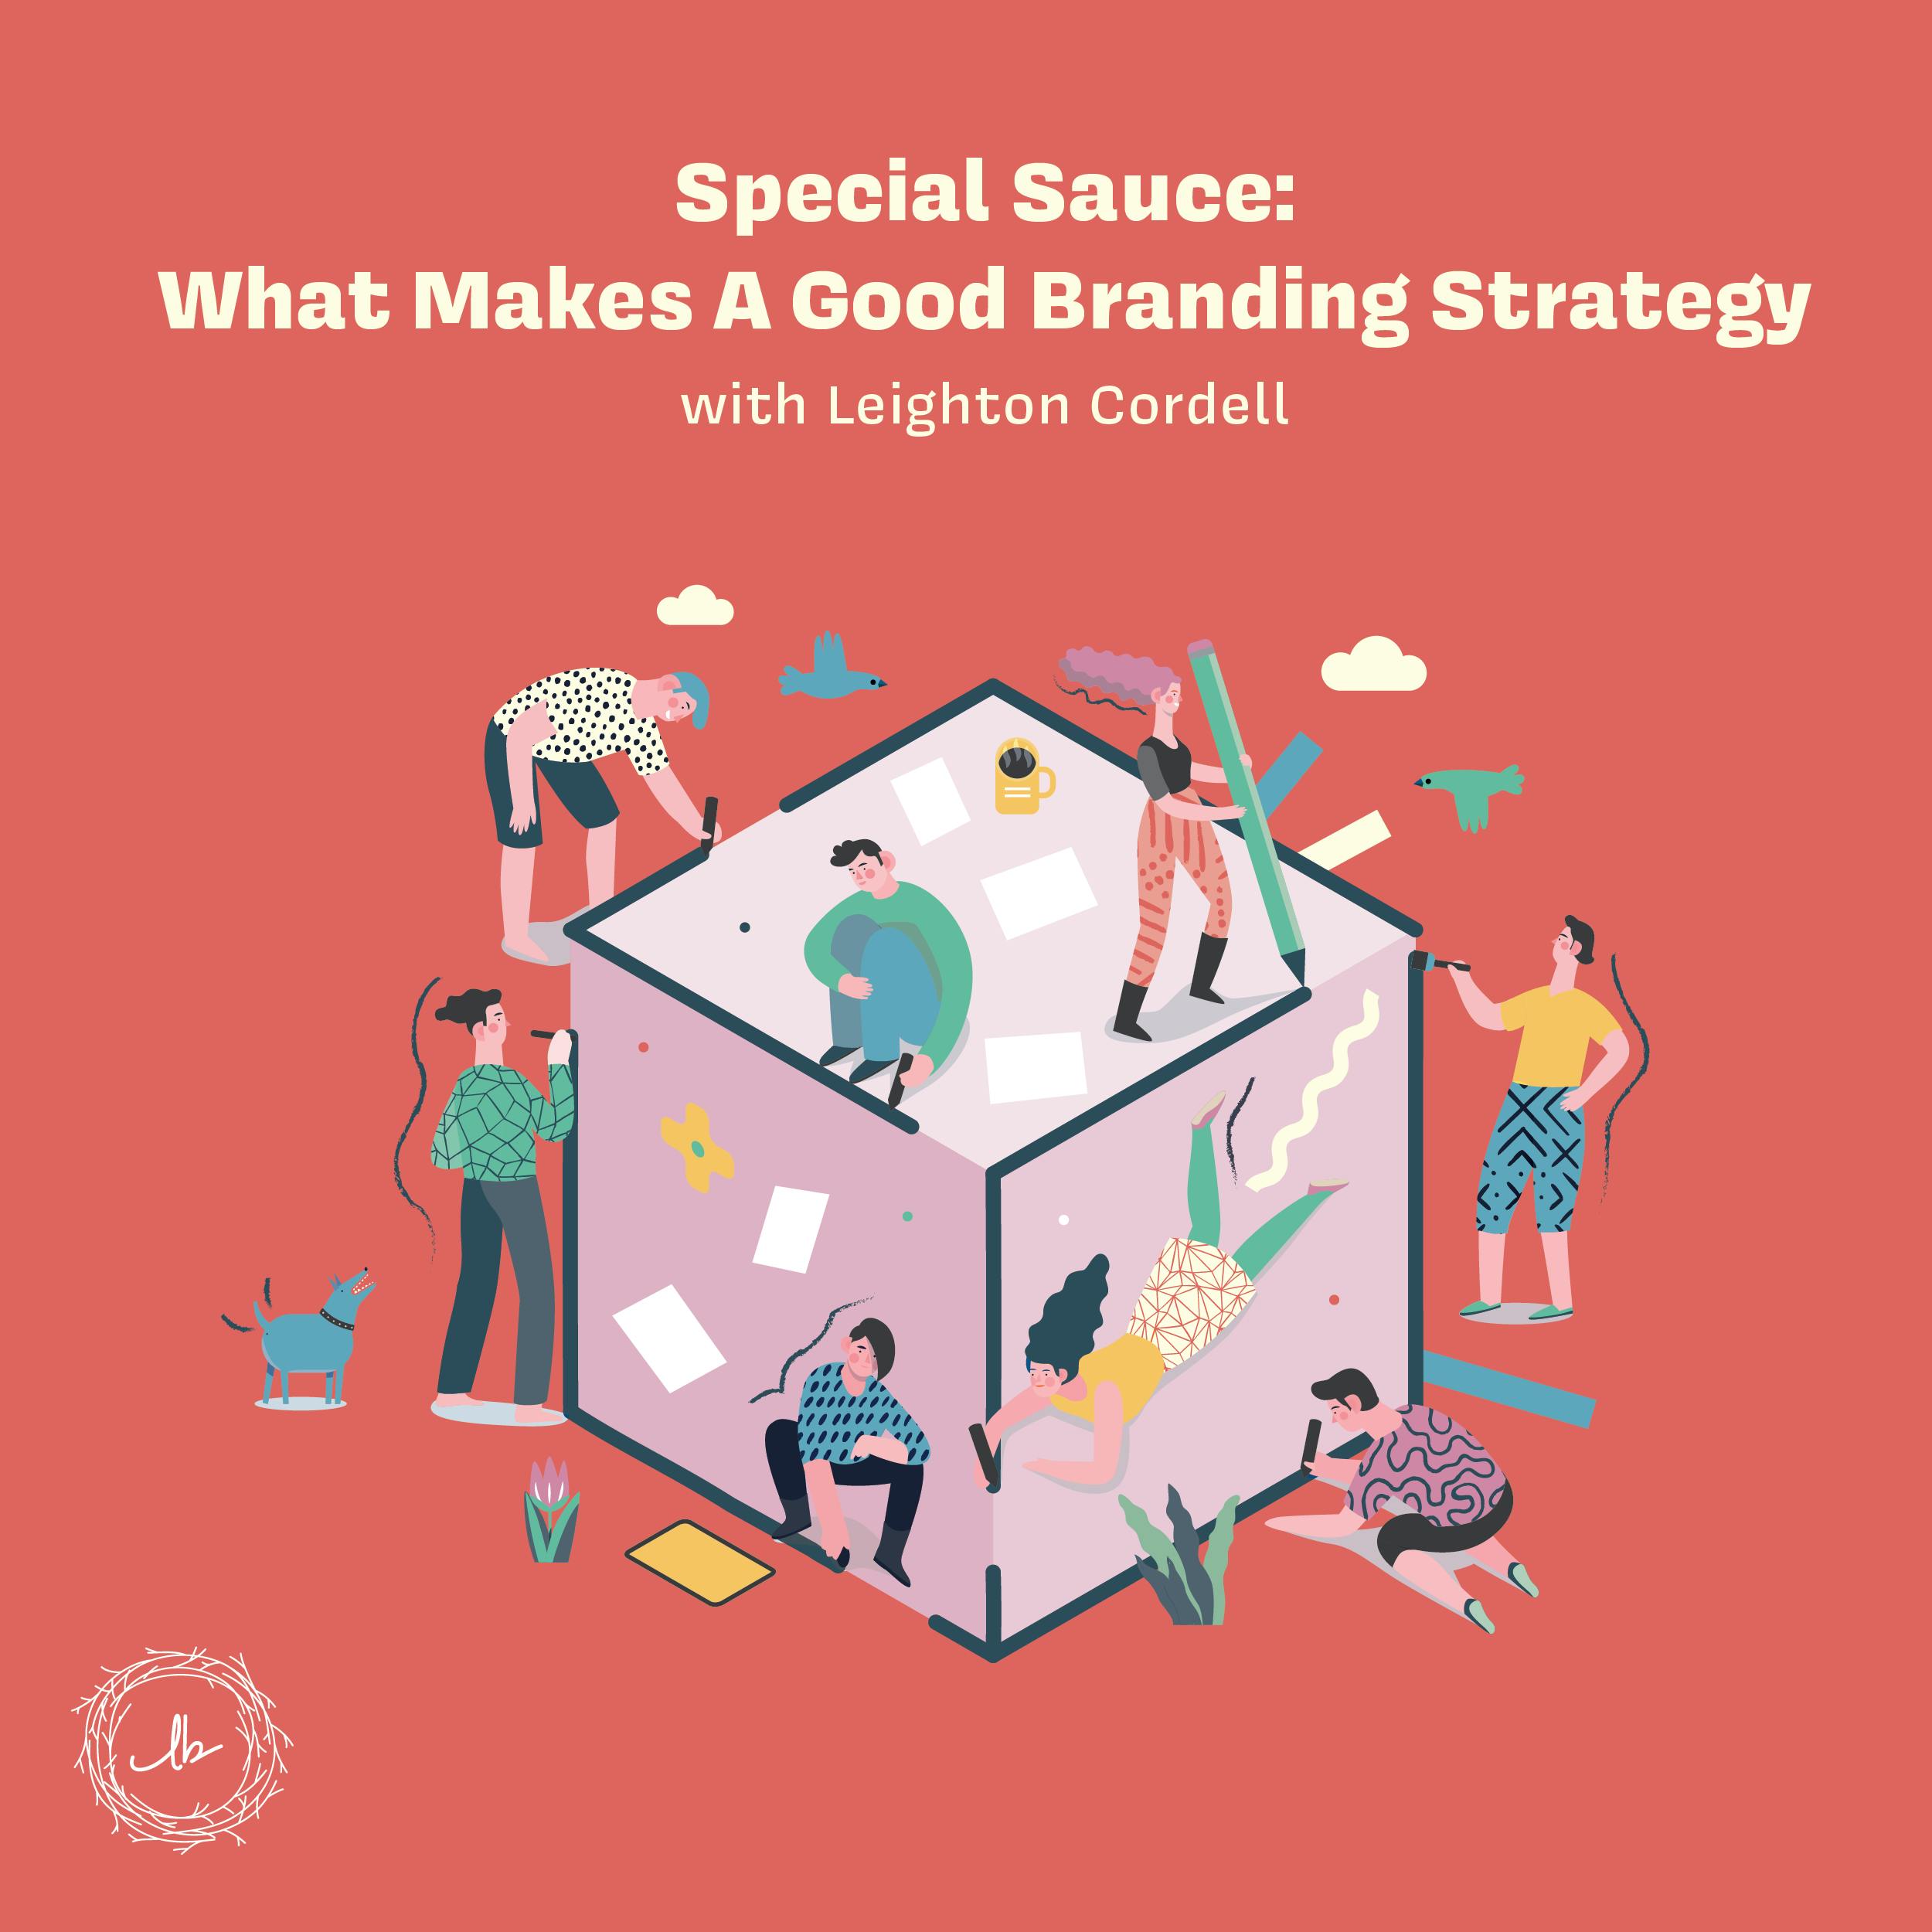 Special Sauce: What Makes a Good Branding Strategy